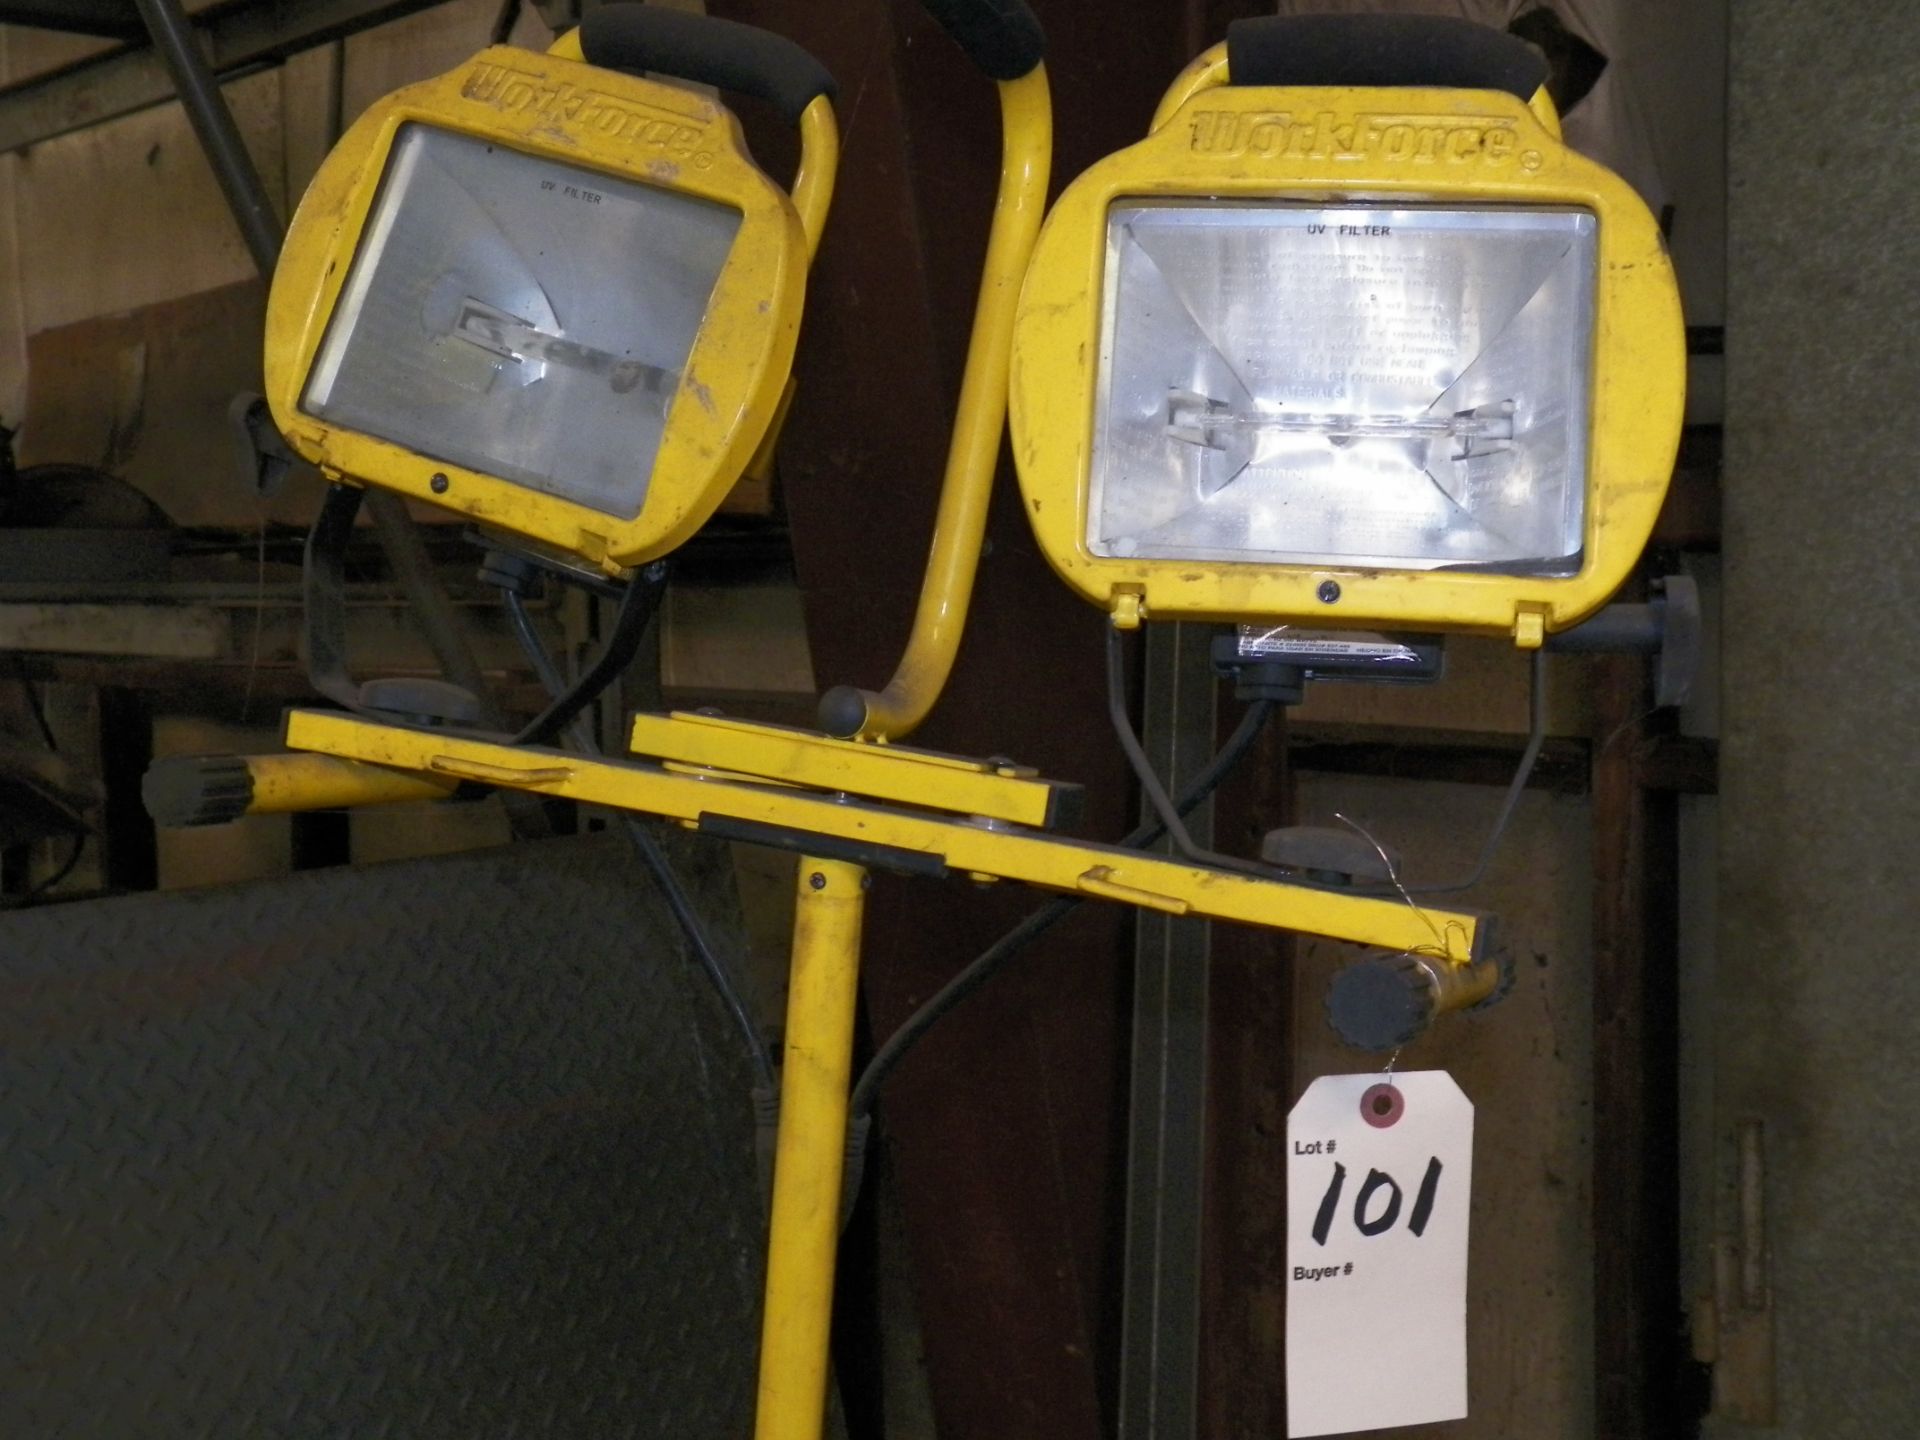 Work Force Utility Lights on stand